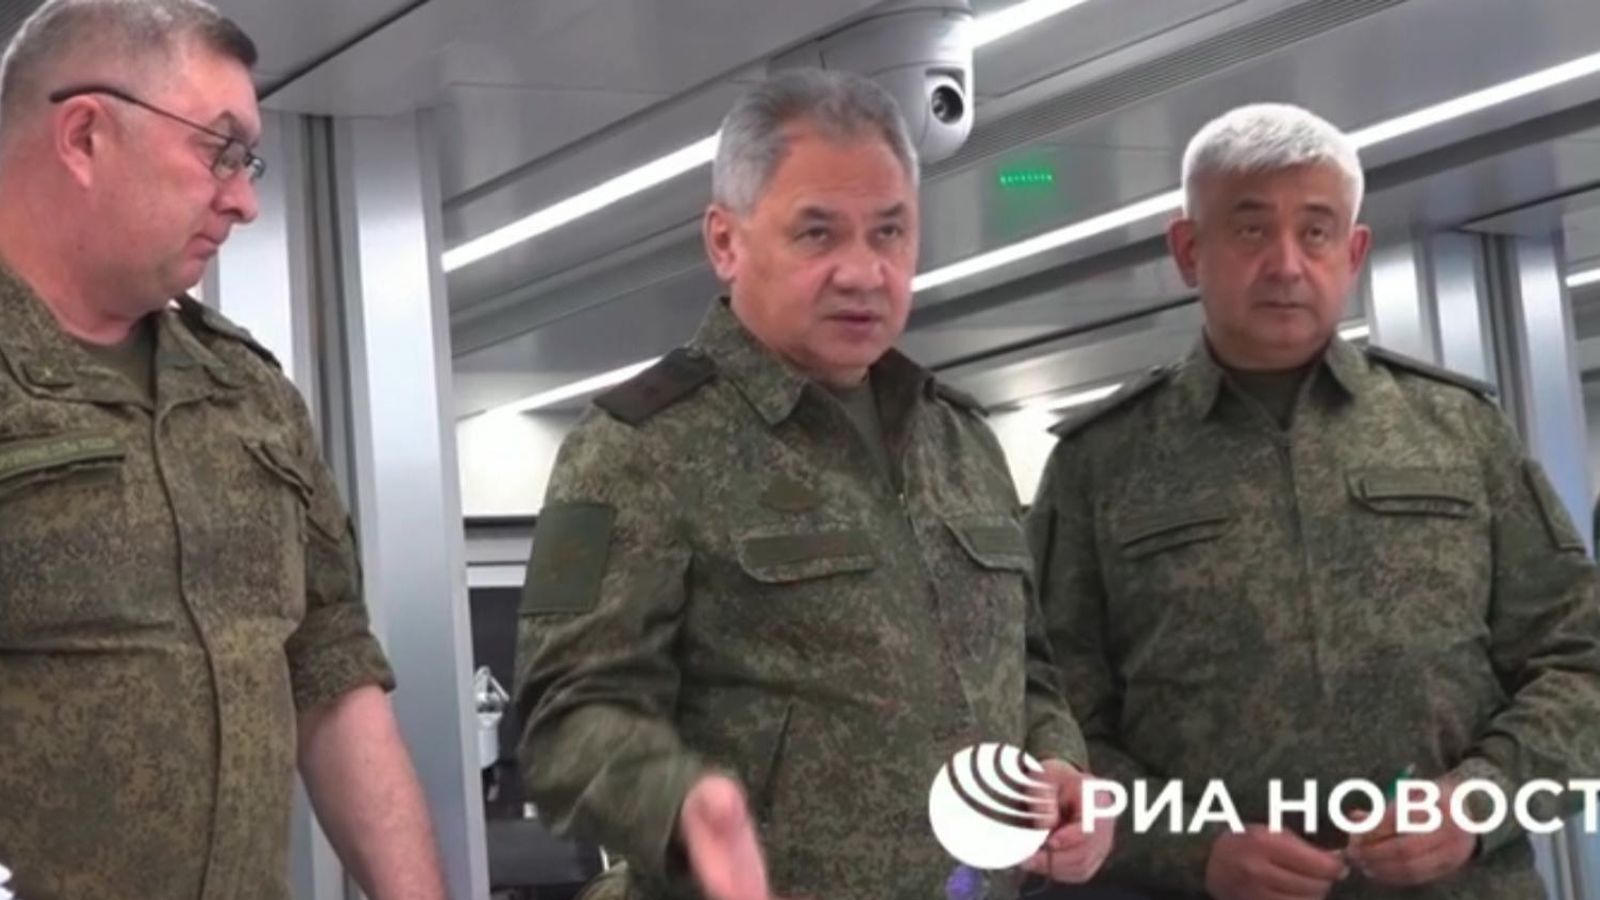 Russian defence minister Sergei Shoigu seen for first time since attempted Wagner coup